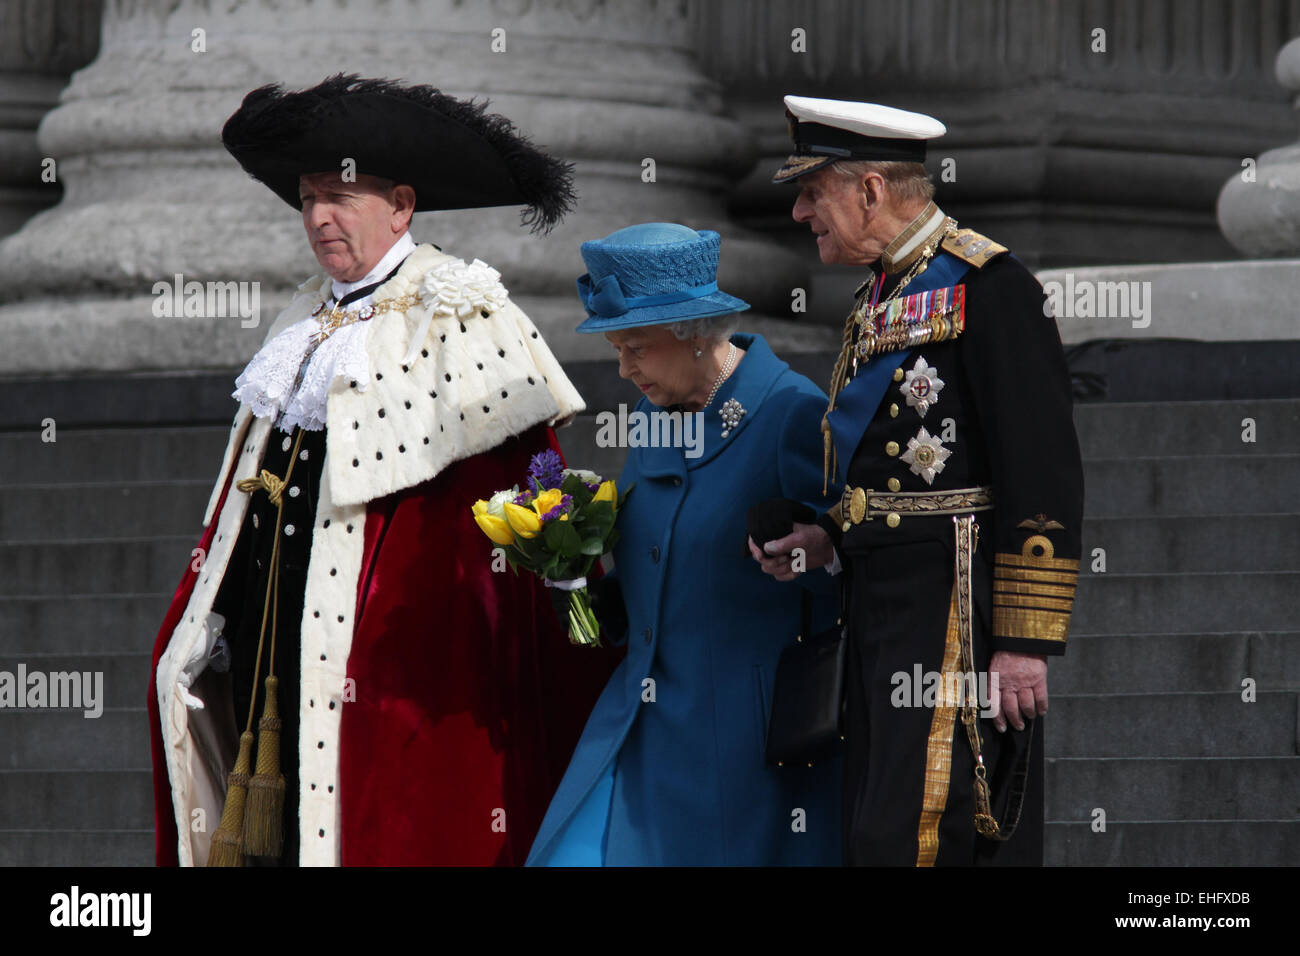 London, UK. 13th March, 2015. Prince Philip, Duke of Edinburgh and Queen Elizabeth II attend a Service of Commemoration for troo Stock Photo